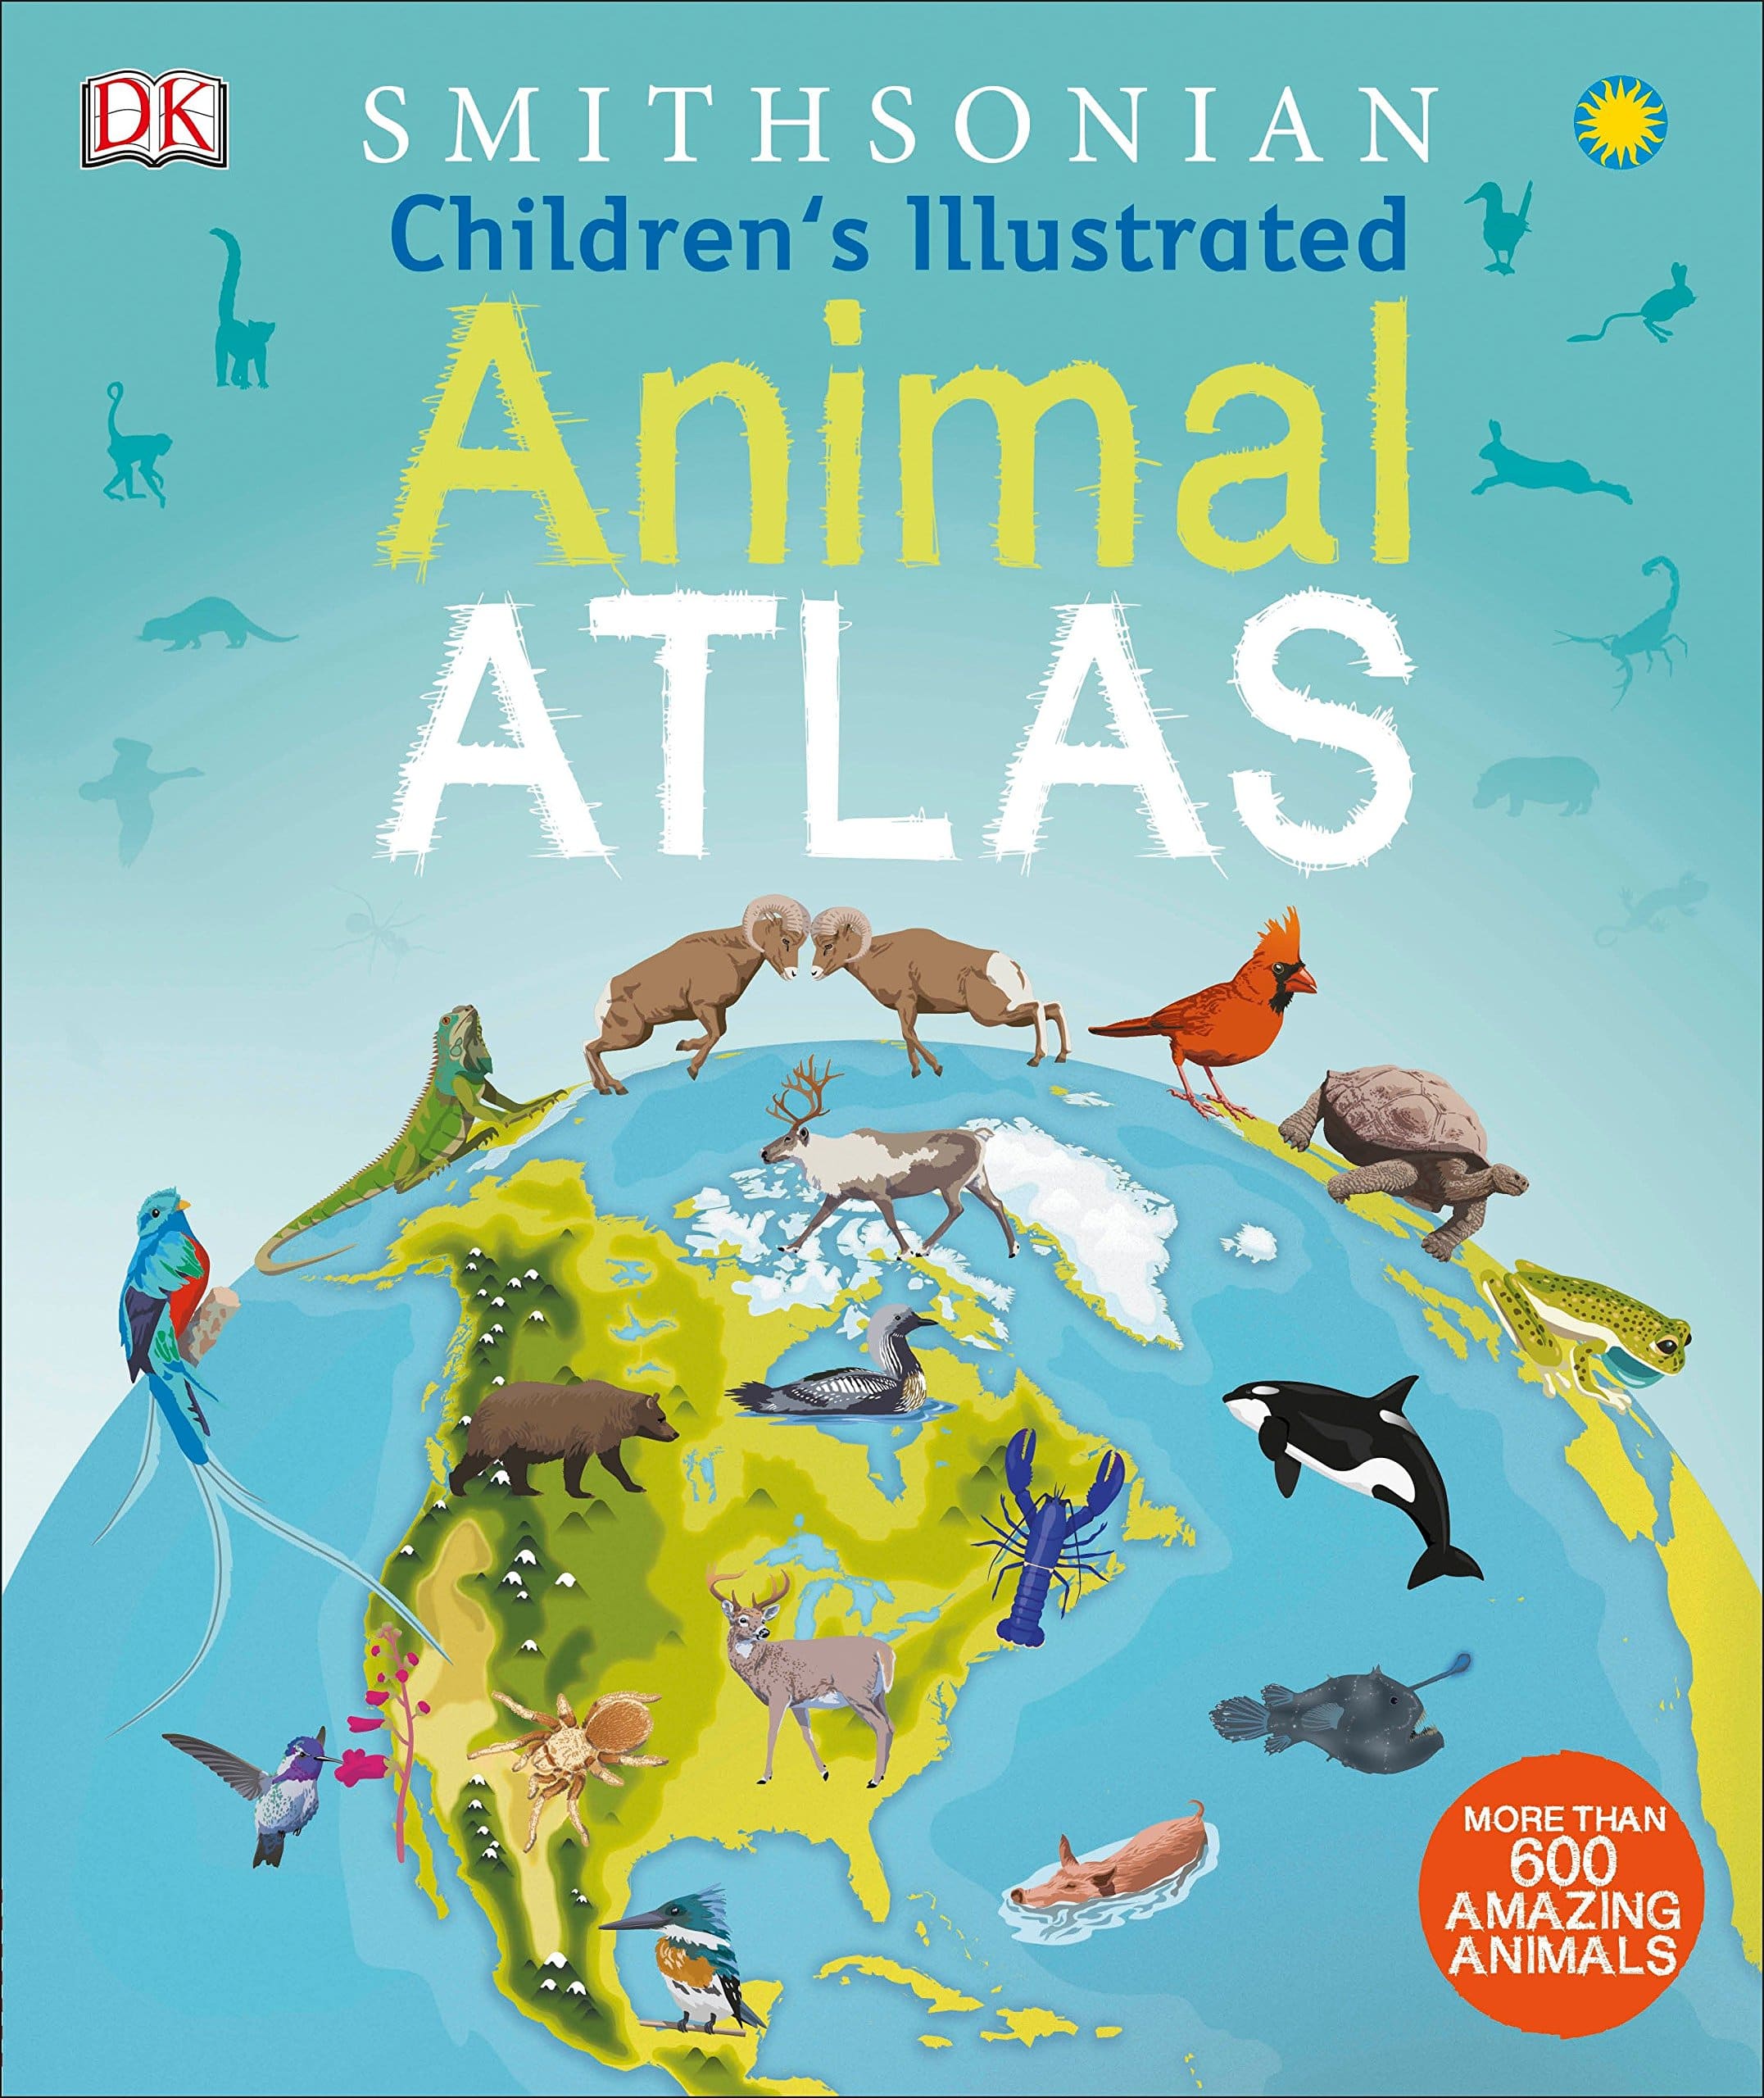 Children's Illustrated Animal Atlas - A2Z Science & Learning Toy Store